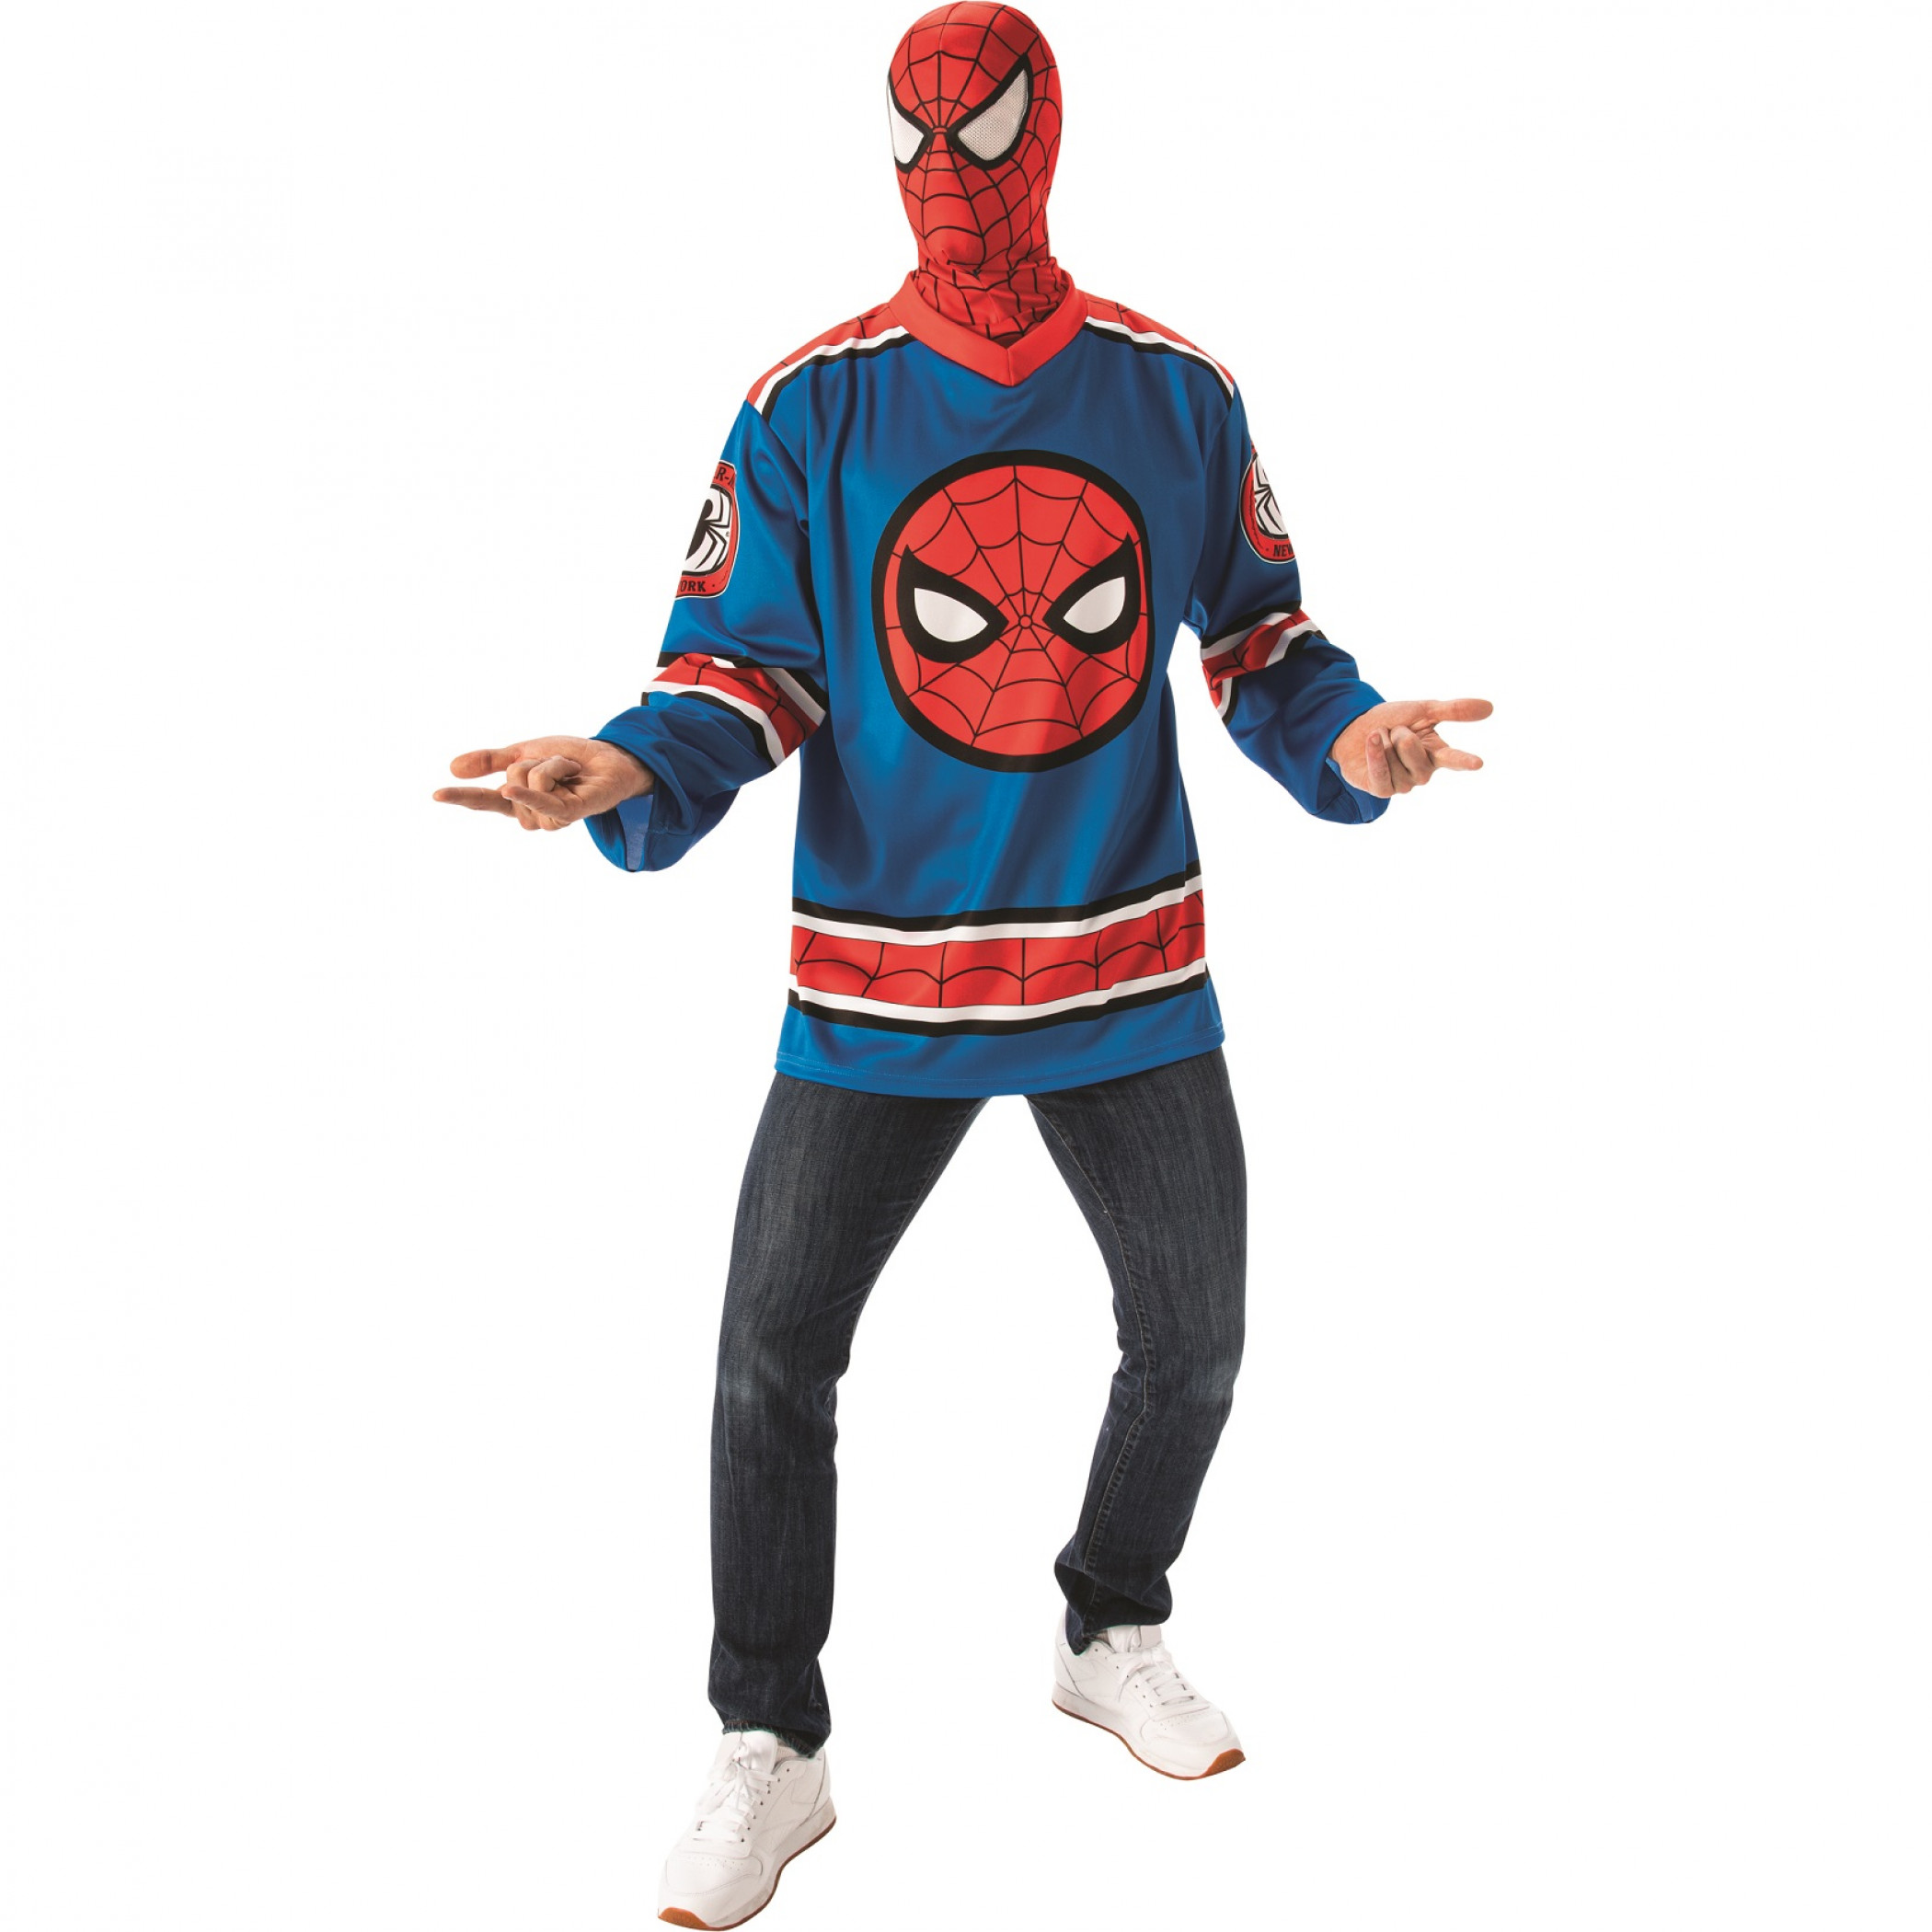 DELUXE SPIDER-MAN JERSEY AND MASK SET FOR MEN